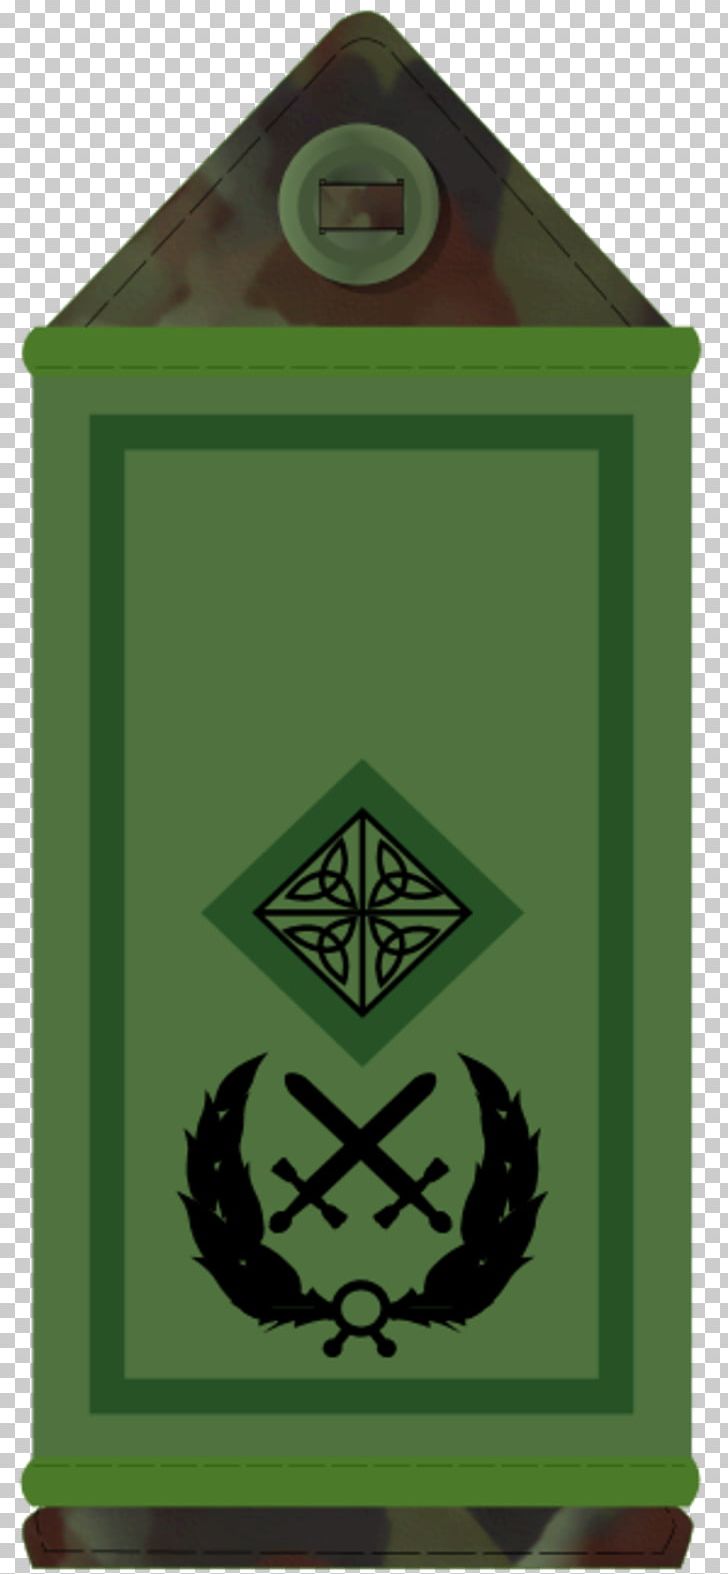 Ireland Defence Forces Irish Army Military Rank PNG, Clipart, Army, Army Officer, Army Reserve, Defence Forces, Green Free PNG Download